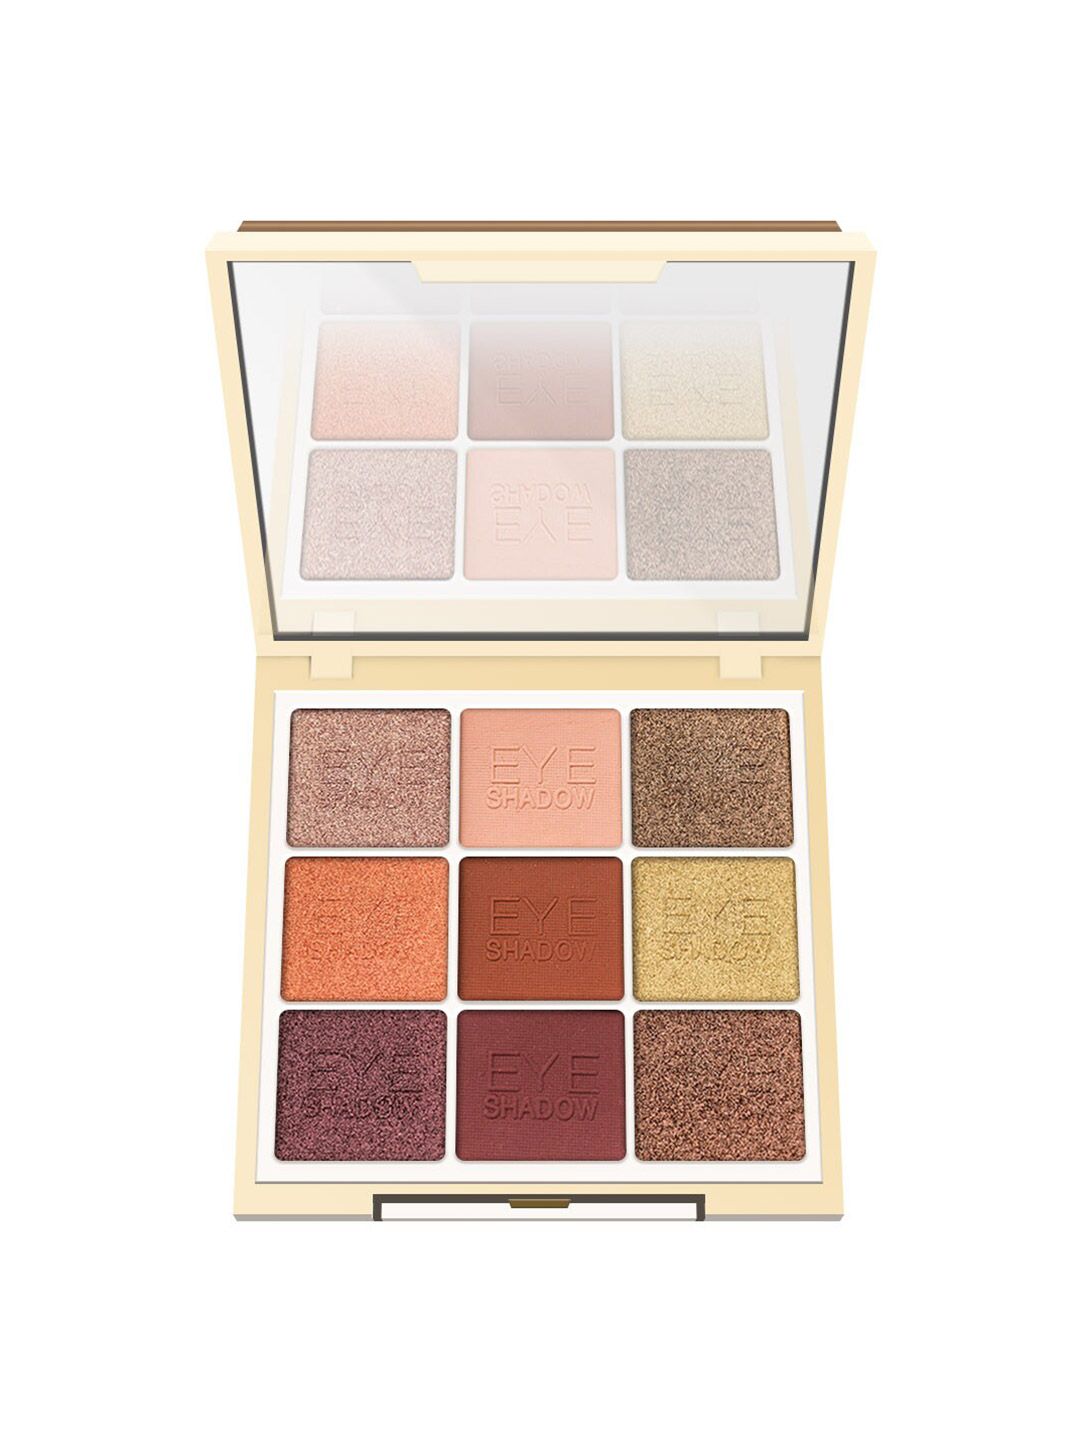 MISS ROSE 9 Color Matte Eyeshadow Palette 7001-384 M02 Price in India